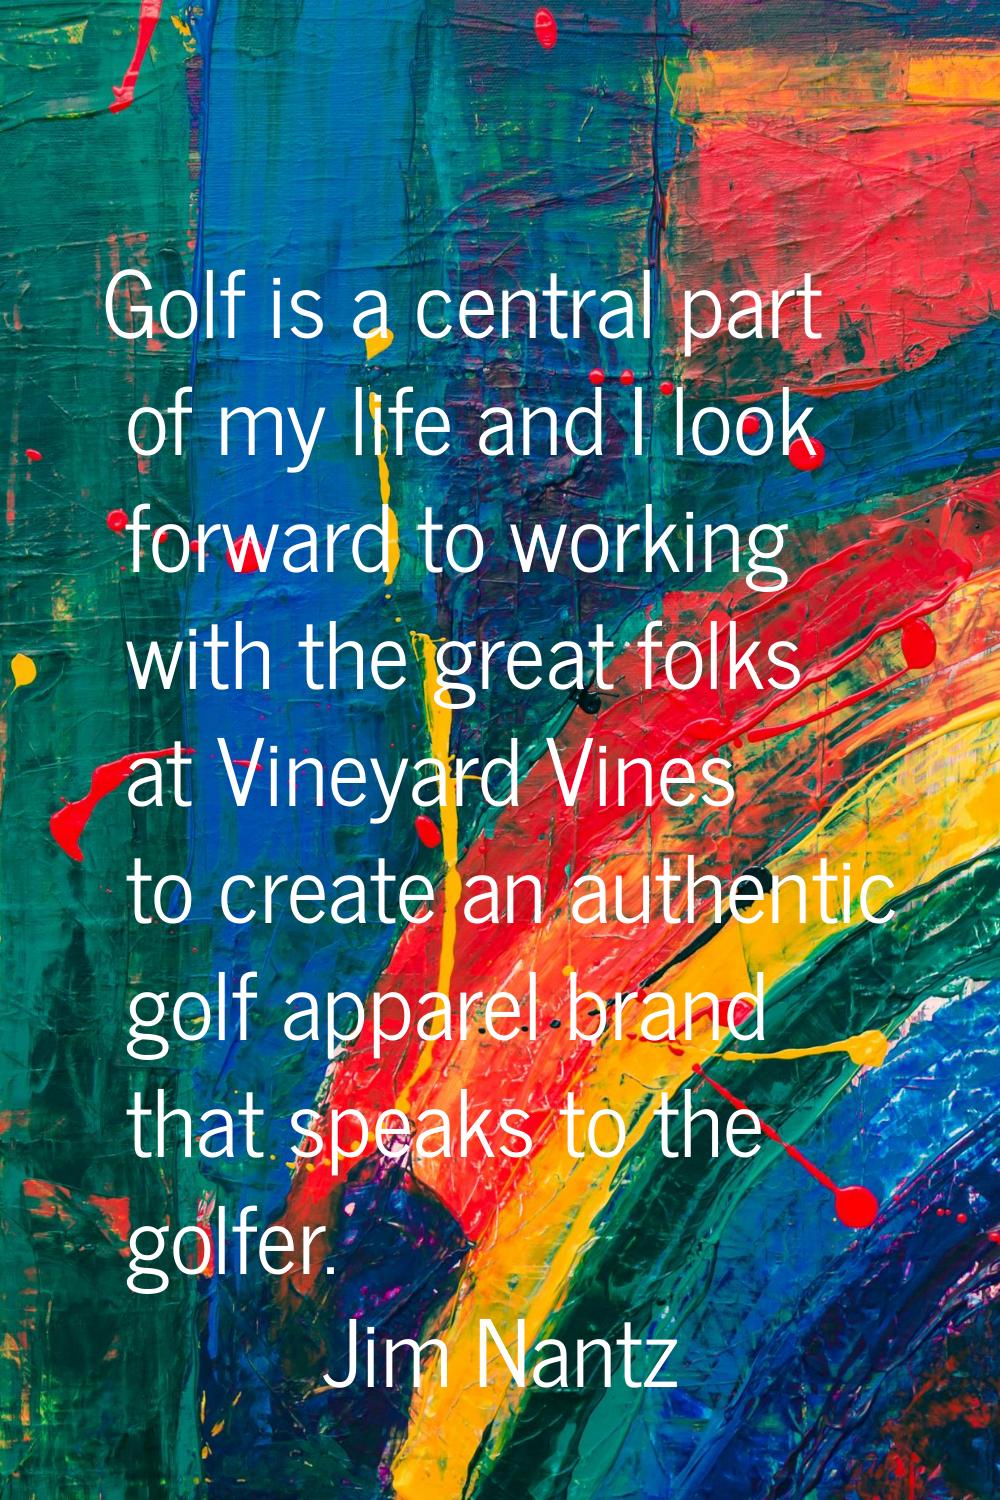 Golf is a central part of my life and I look forward to working with the great folks at Vineyard Vi